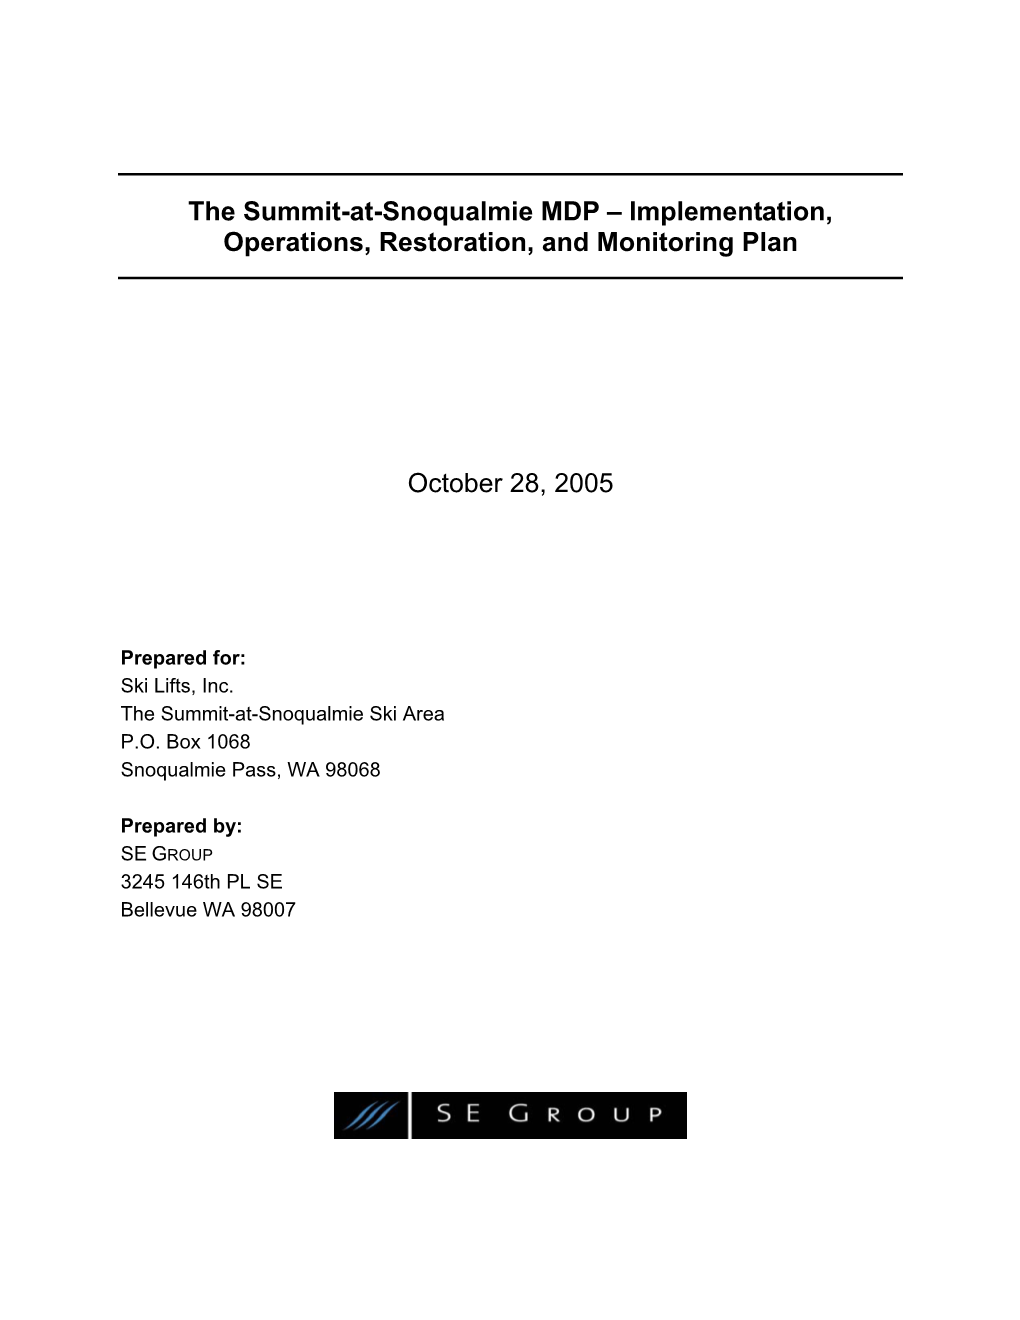 The Summit-At-Snoqualmie MDP Implementation, Operations